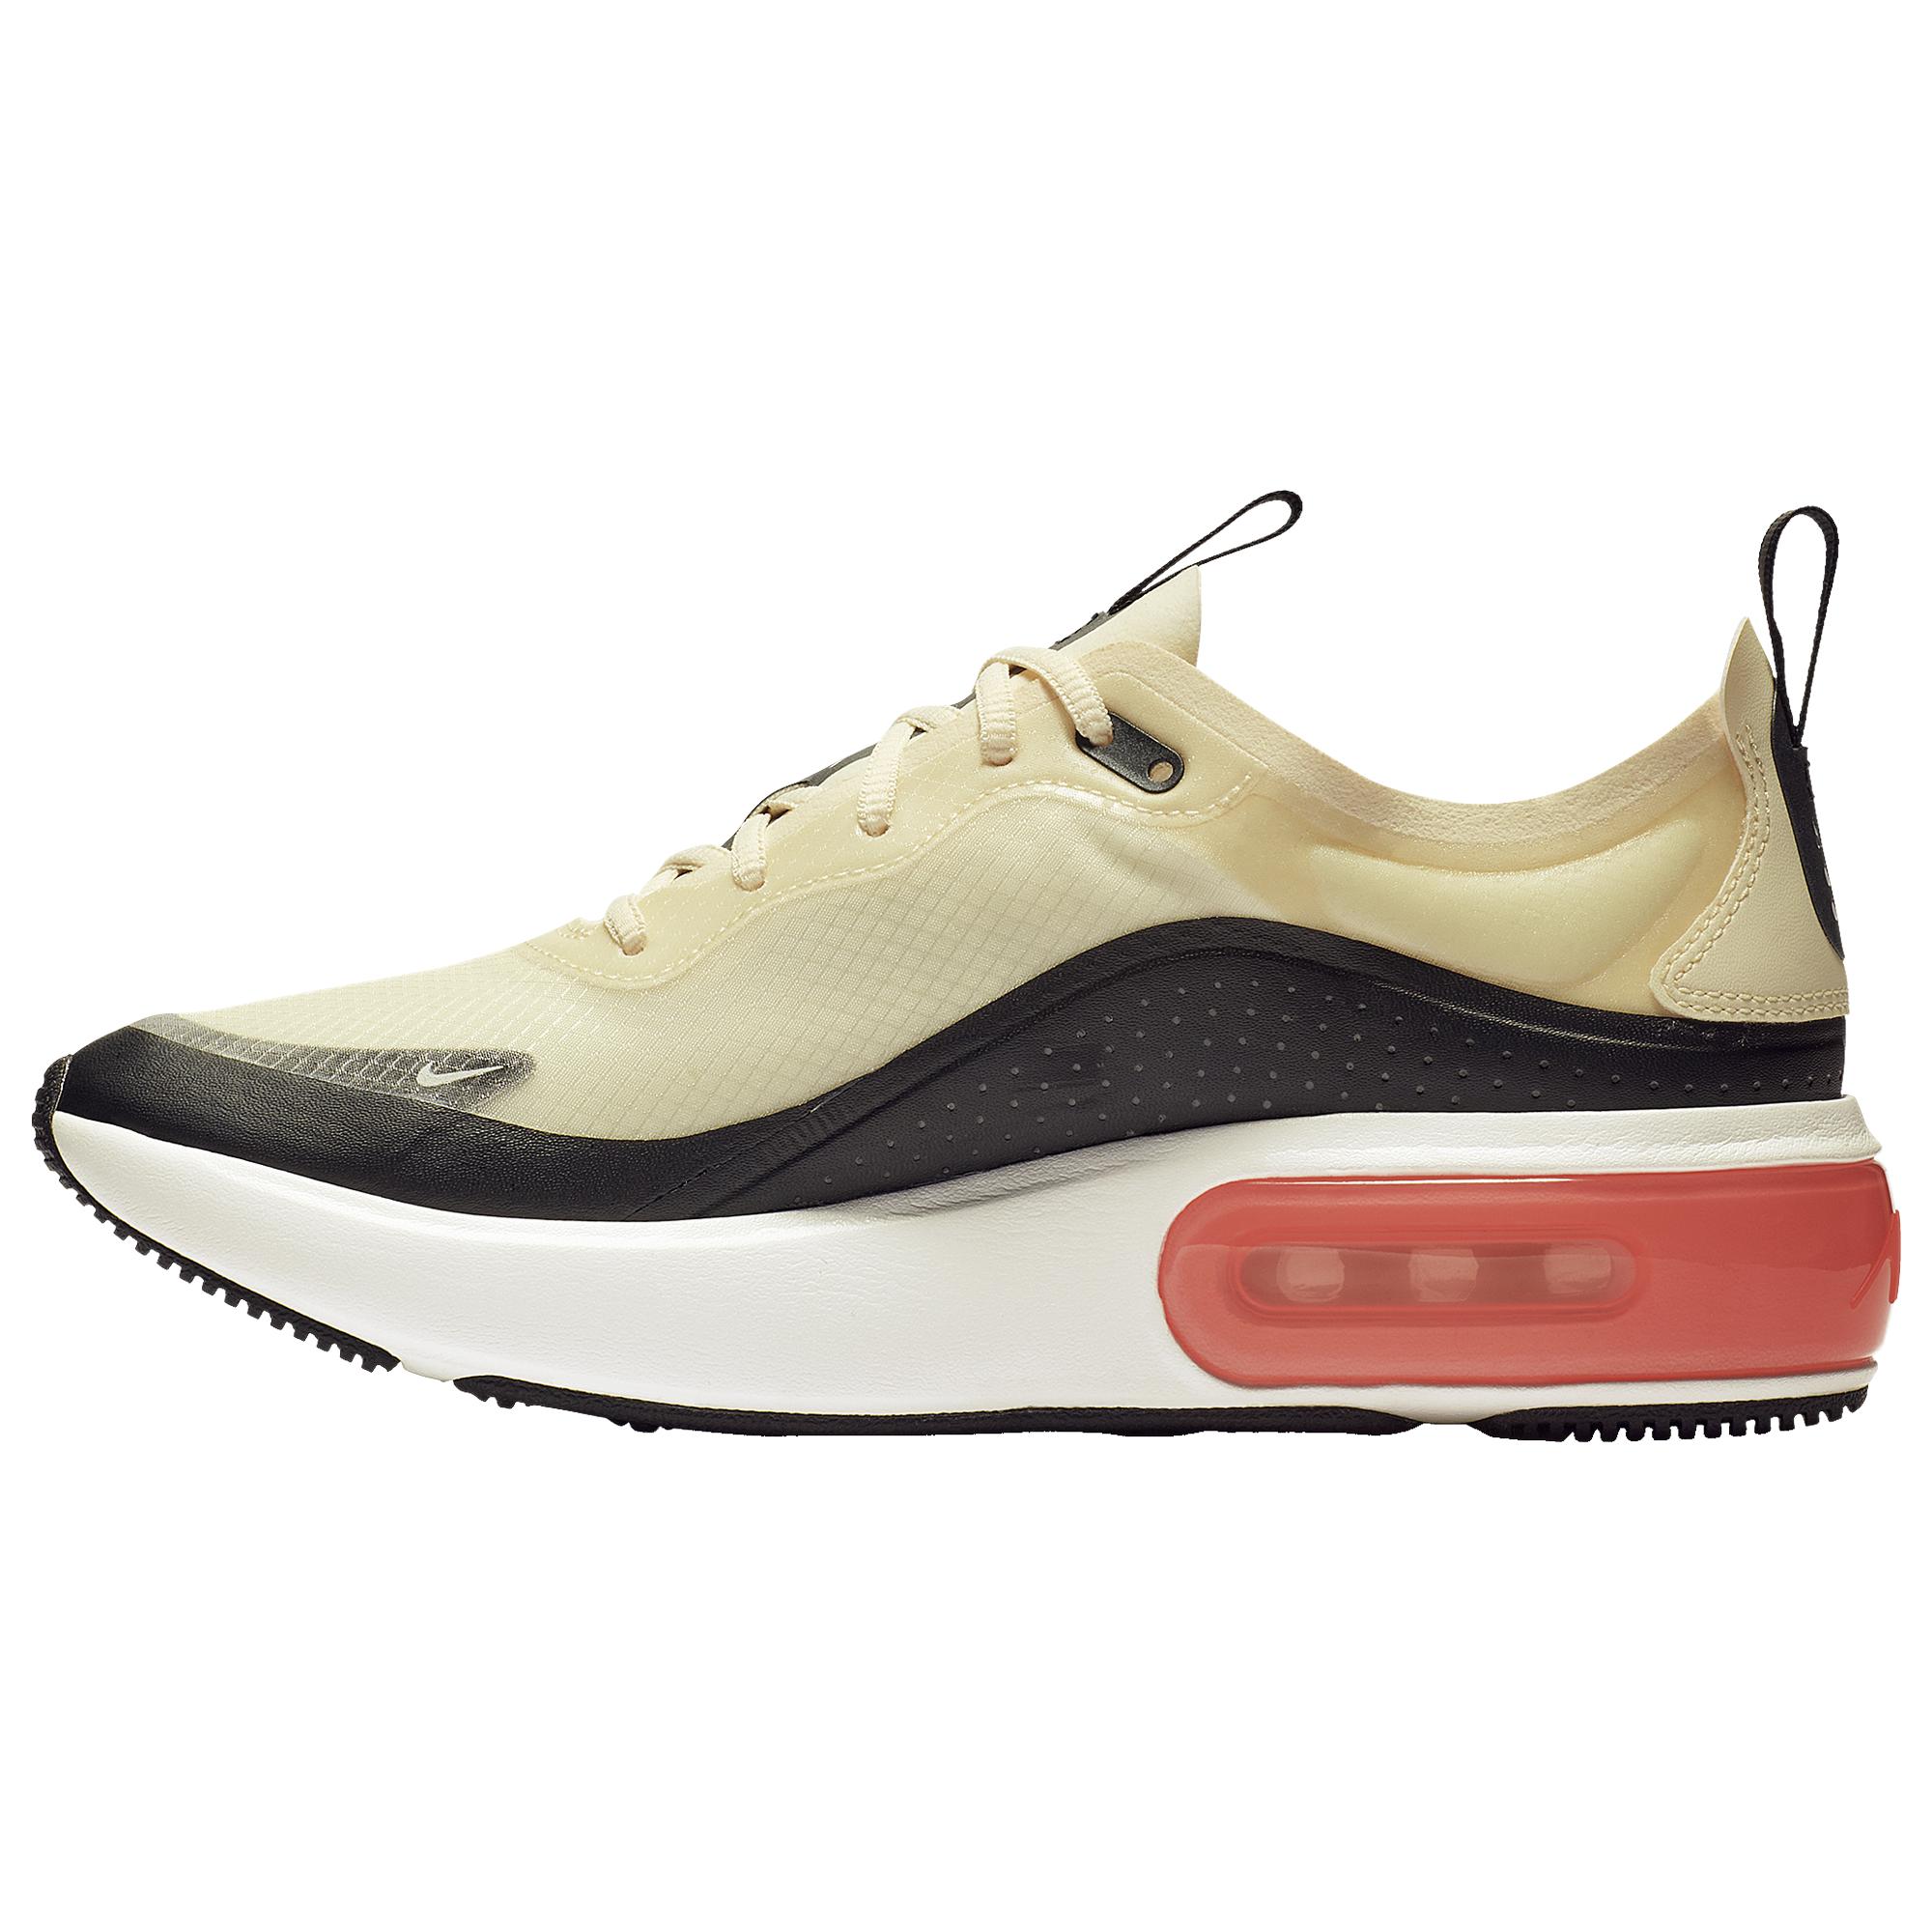 Nike Womens Air Max Dia Se Shoes - Size 6.5w - Lyst